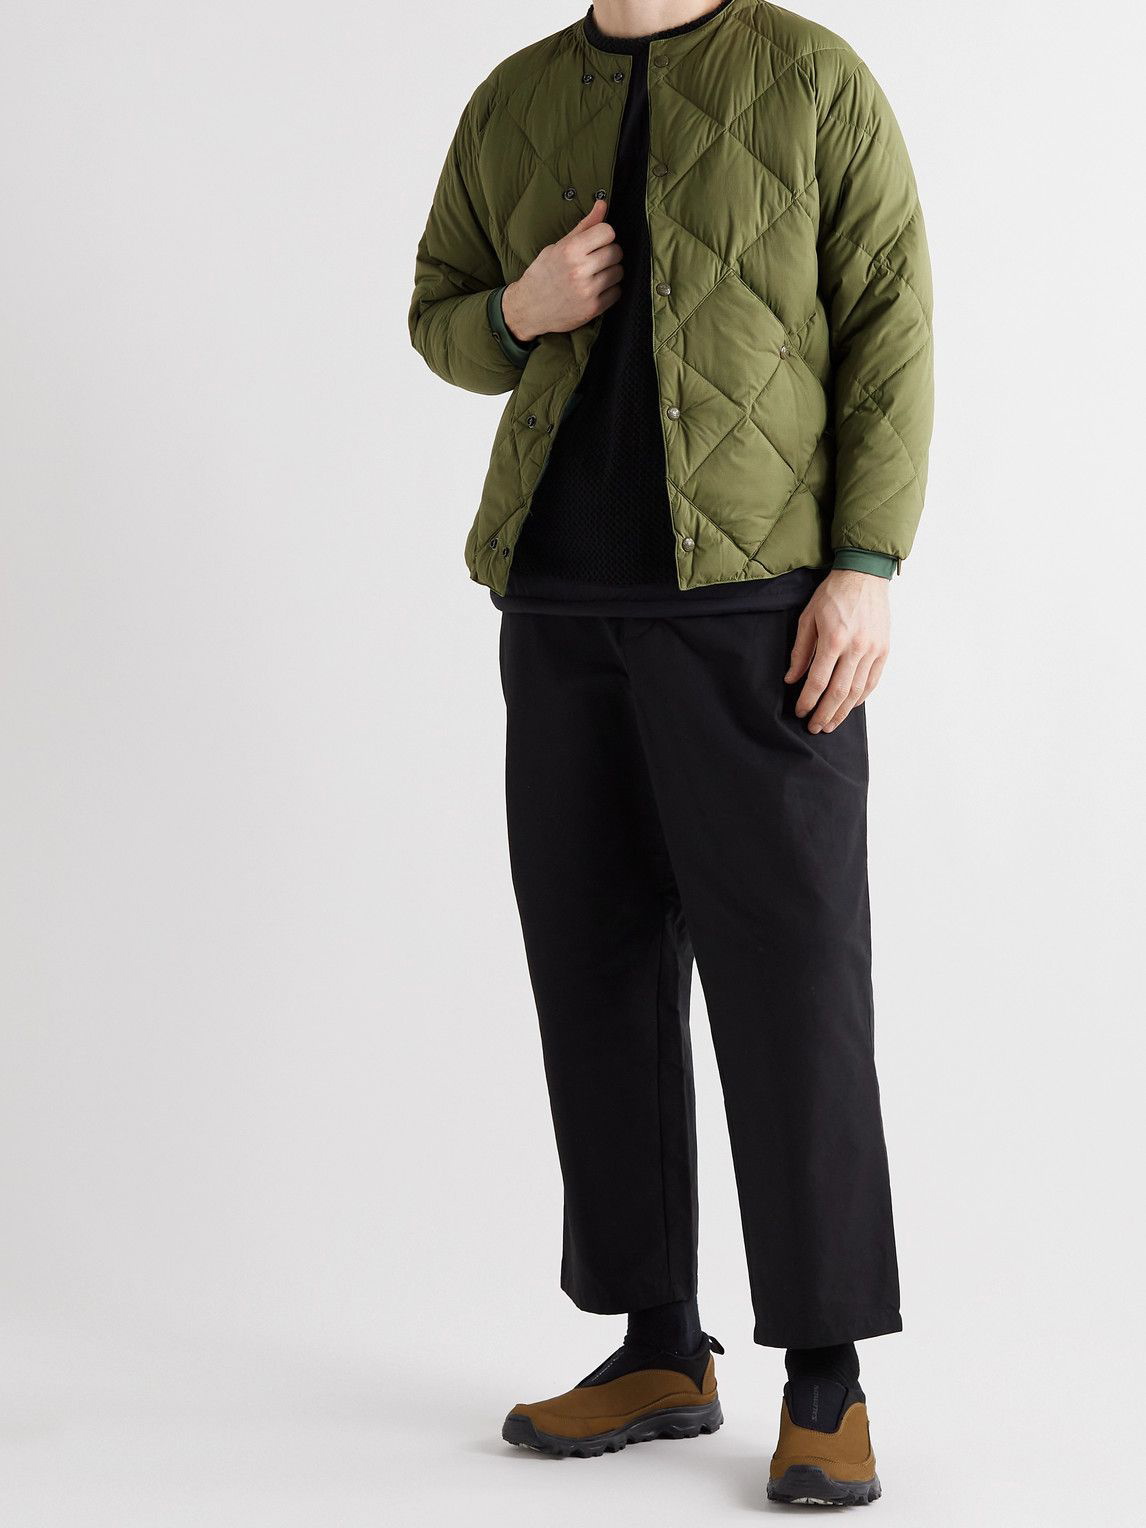 Comfy Outdoor Garment - Quilted Padded Shell Down Jacket - Green Comfy ...